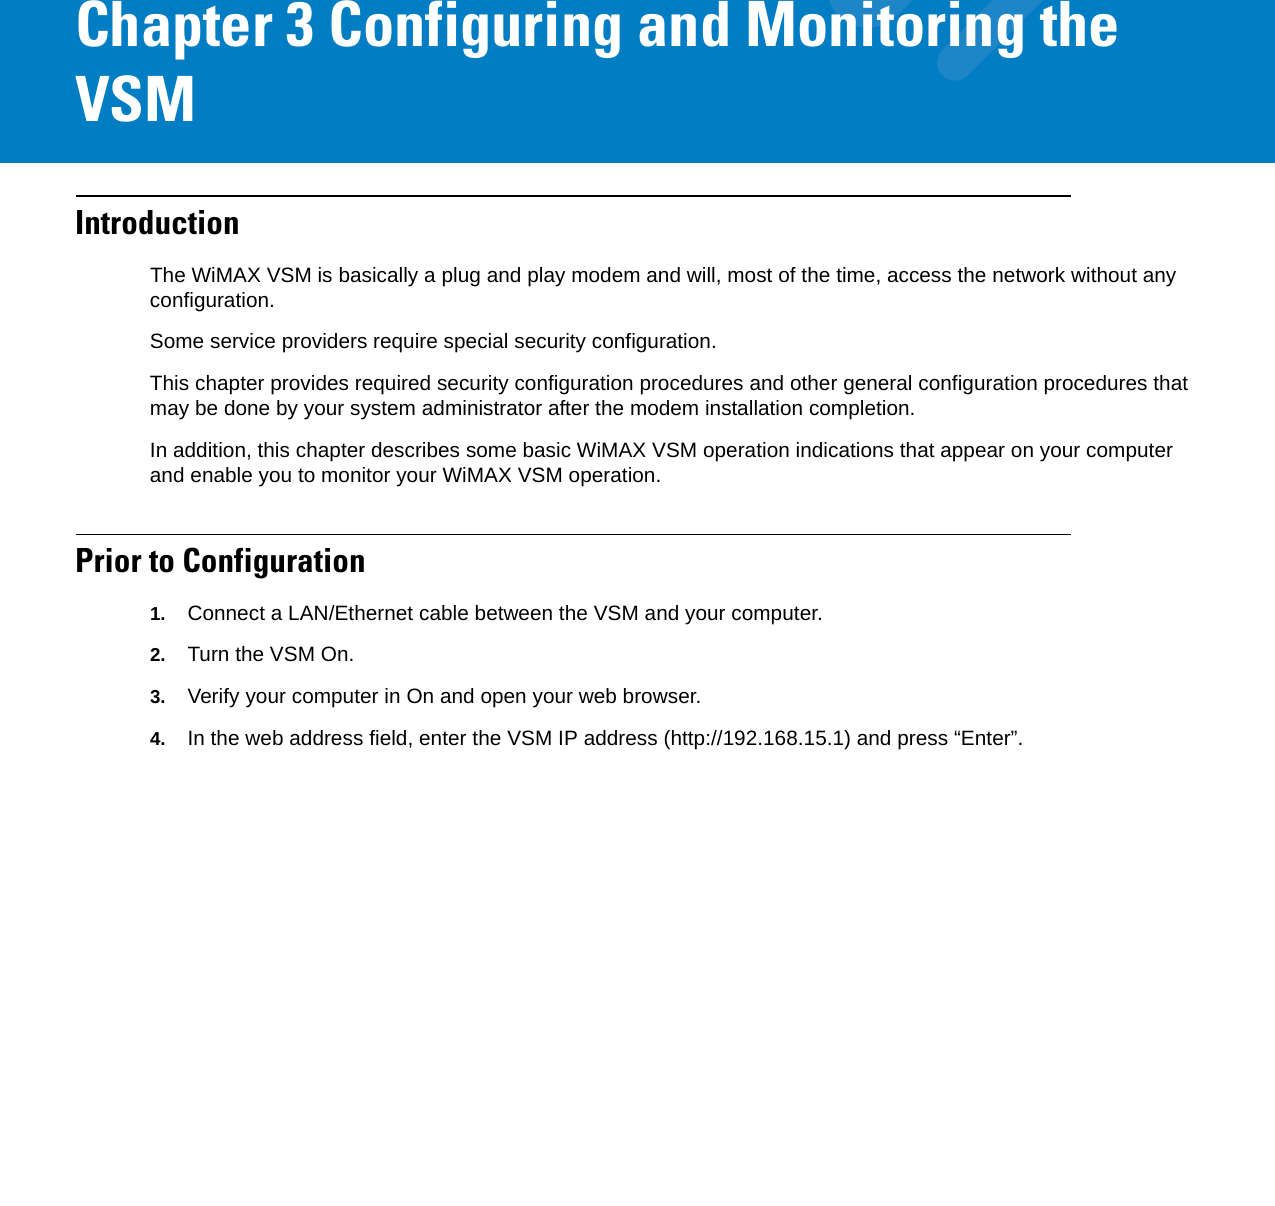 Chapter 3 Configuring and Monitoring the VSMIntroductionThe WiMAX VSM is basically a plug and play modem and will, most of the time, access the network without any configuration.Some service providers require special security configuration.This chapter provides required security configuration procedures and other general configuration procedures that may be done by your system administrator after the modem installation completion.In addition, this chapter describes some basic WiMAX VSM operation indications that appear on your computer and enable you to monitor your WiMAX VSM operation.Prior to Configuration1. Connect a LAN/Ethernet cable between the VSM and your computer.2. Turn the VSM On.3. Verify your computer in On and open your web browser.4. In the web address field, enter the VSM IP address (http://192.168.15.1) and press “Enter”.